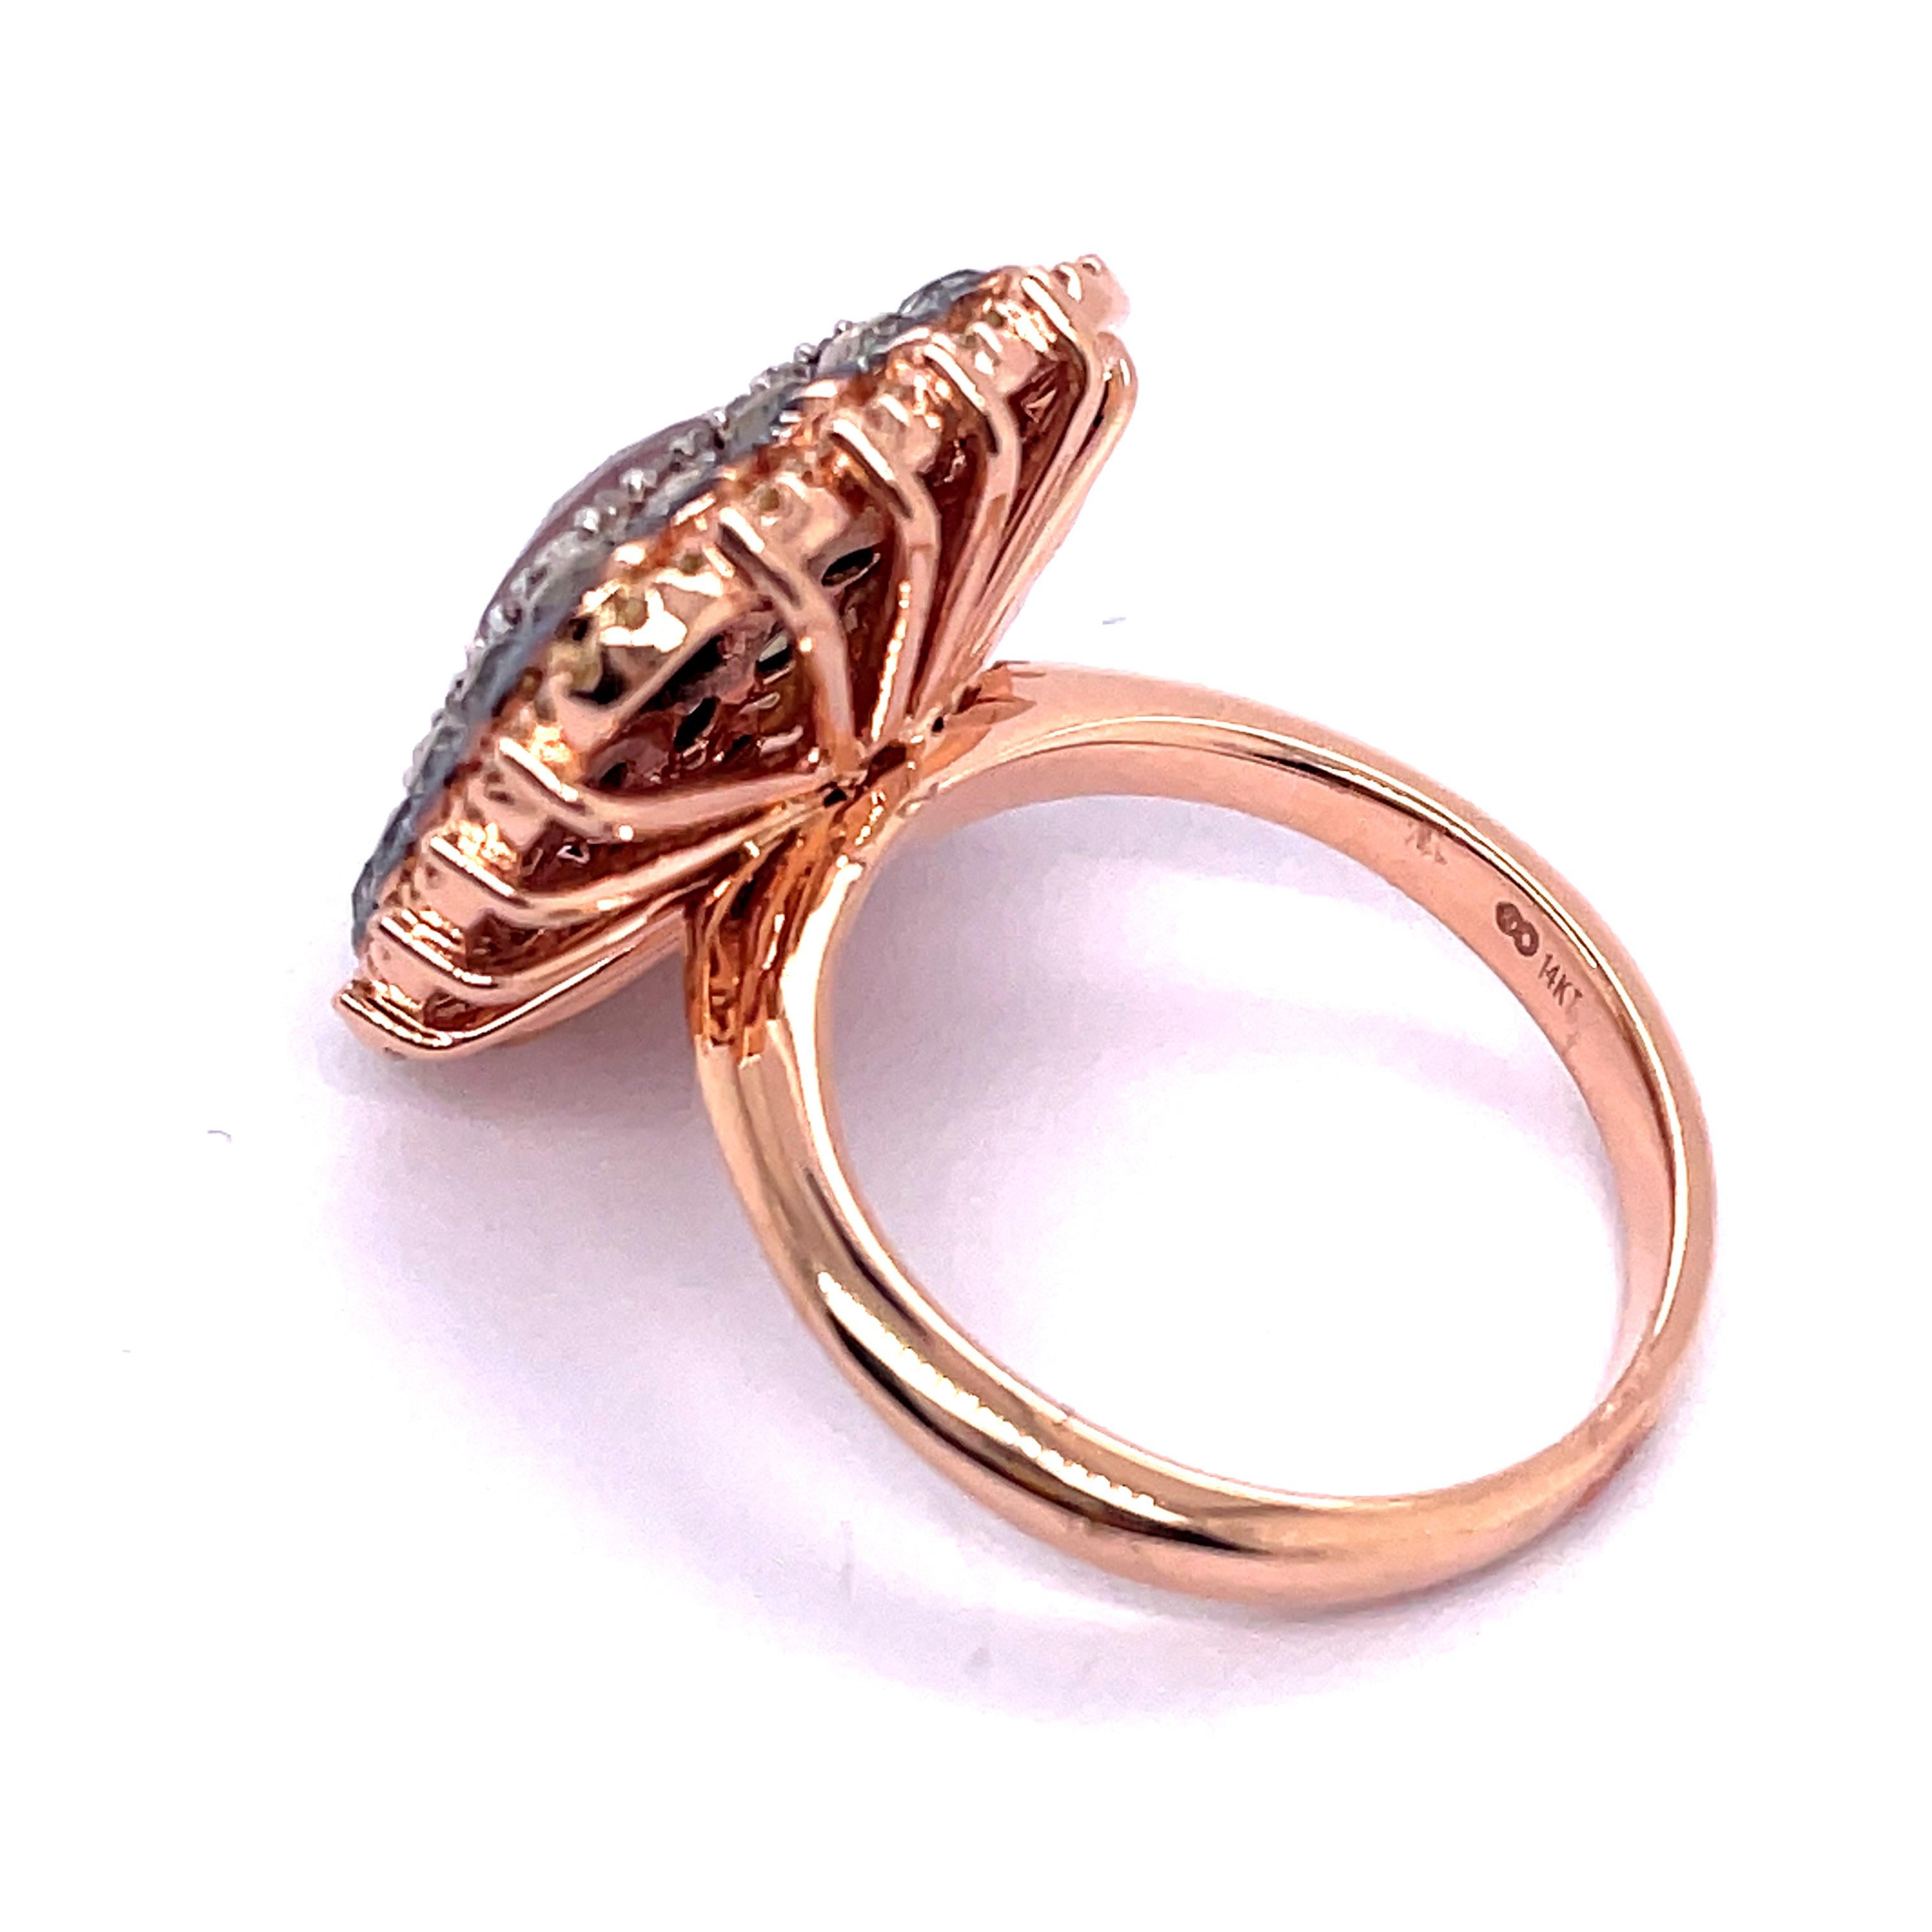 14Kt Rose Gold 3.25ct Diamond Cocktail Ring In Excellent Condition For Sale In New York, NY